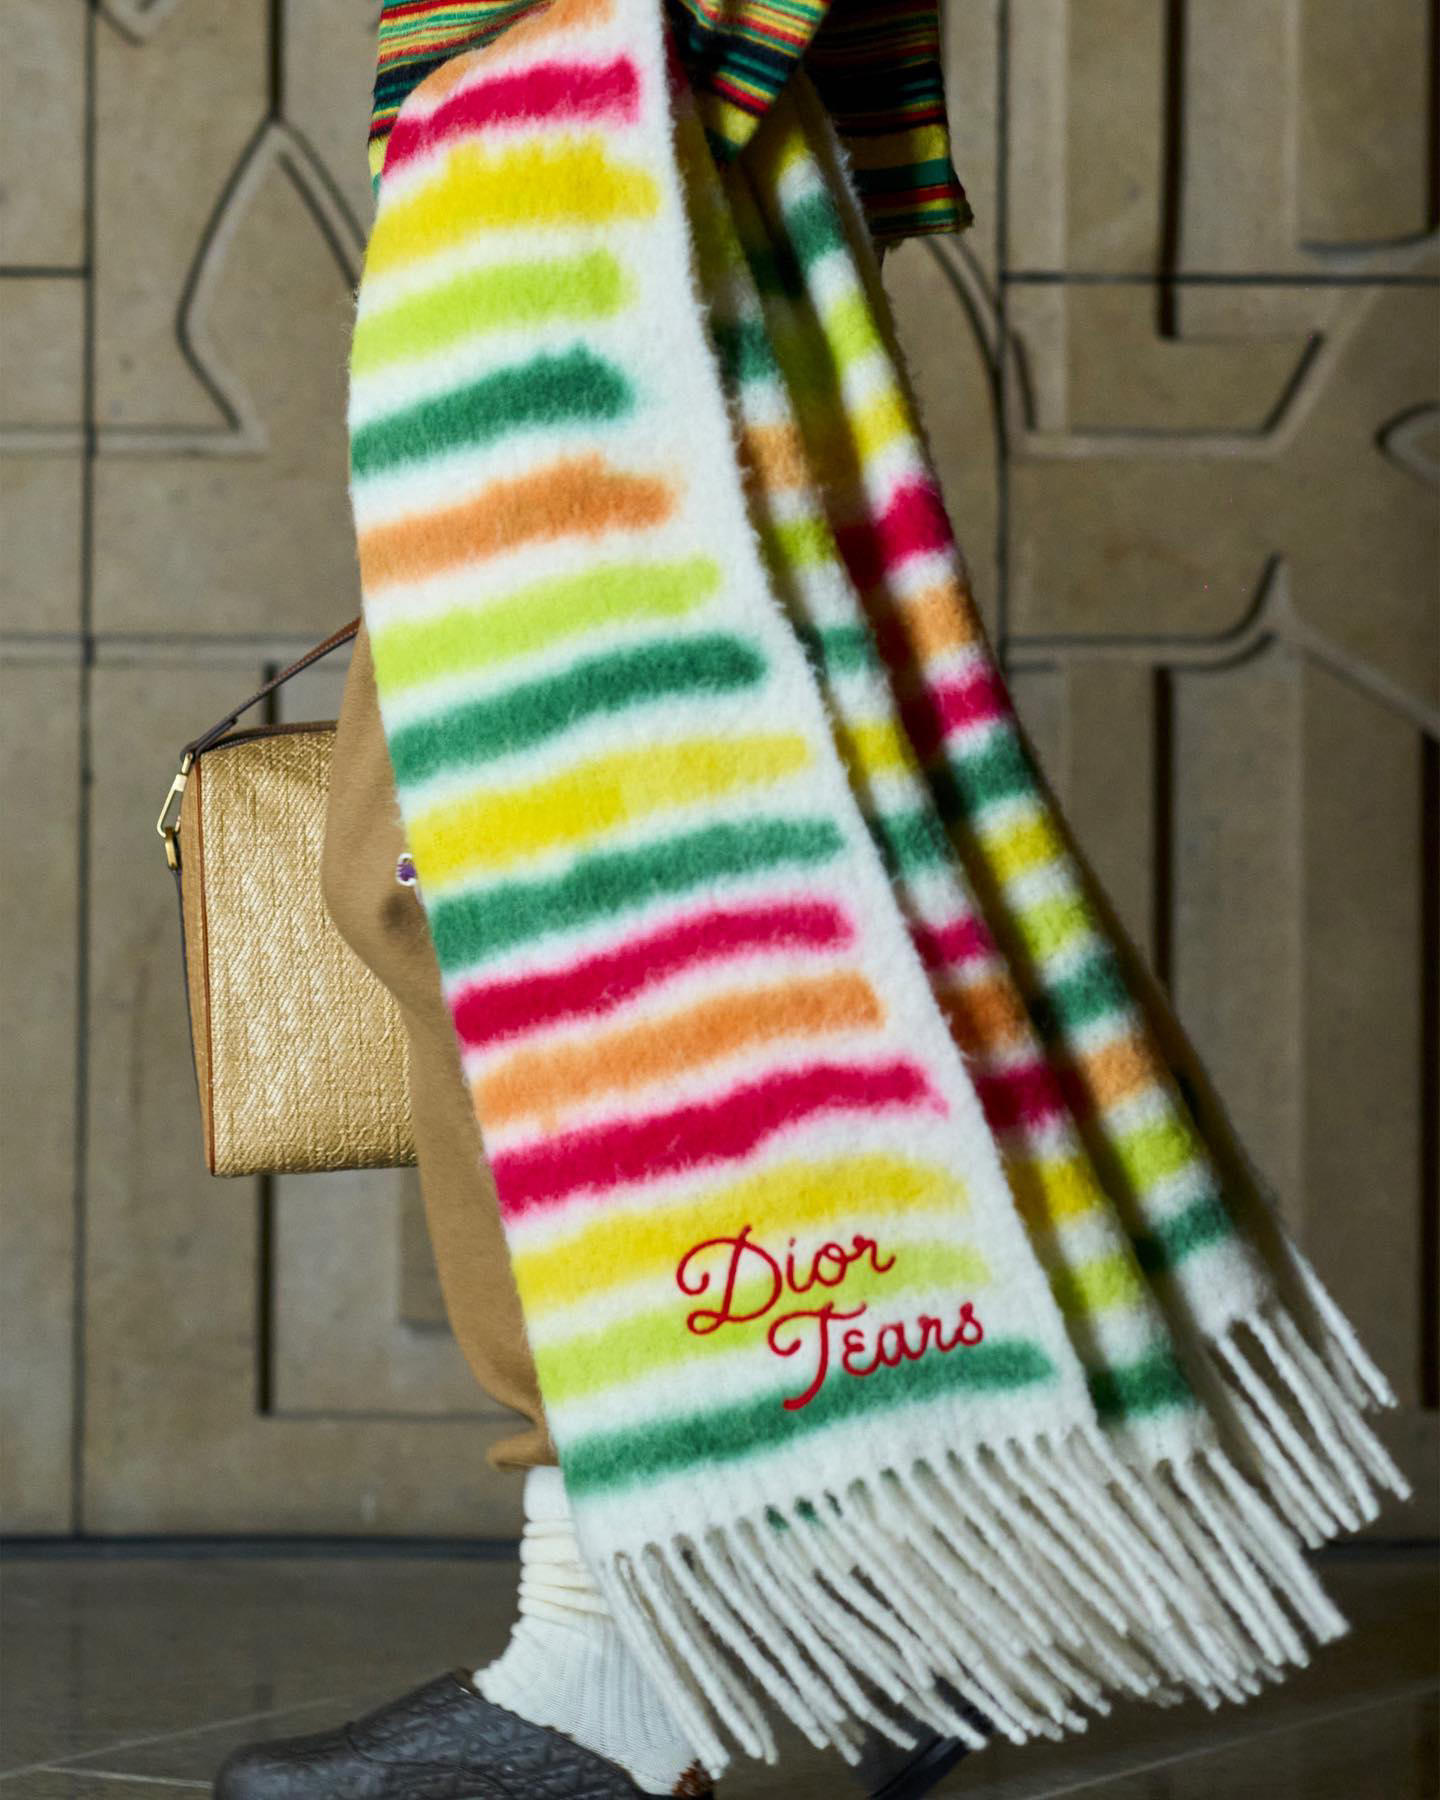 Dior Official - Painterly striped scarves and crocheted hats, and the logoed embroideries of the cot